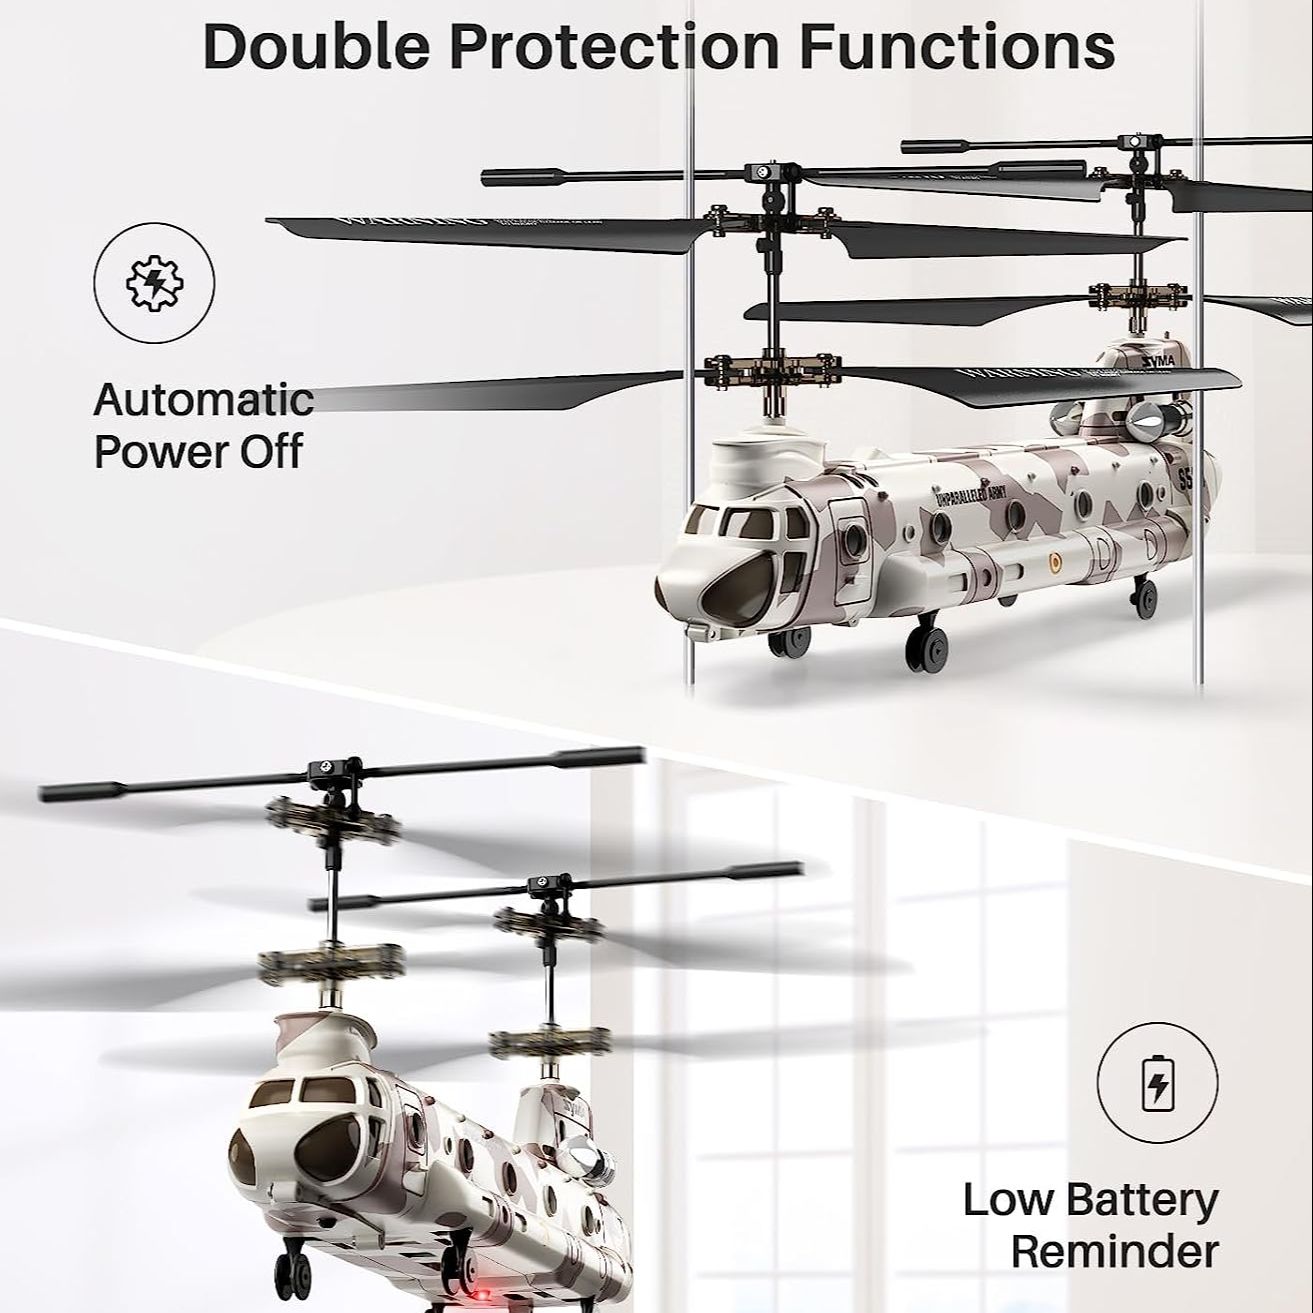 Double Protection Functions Automatic Power Off Low Battery Re